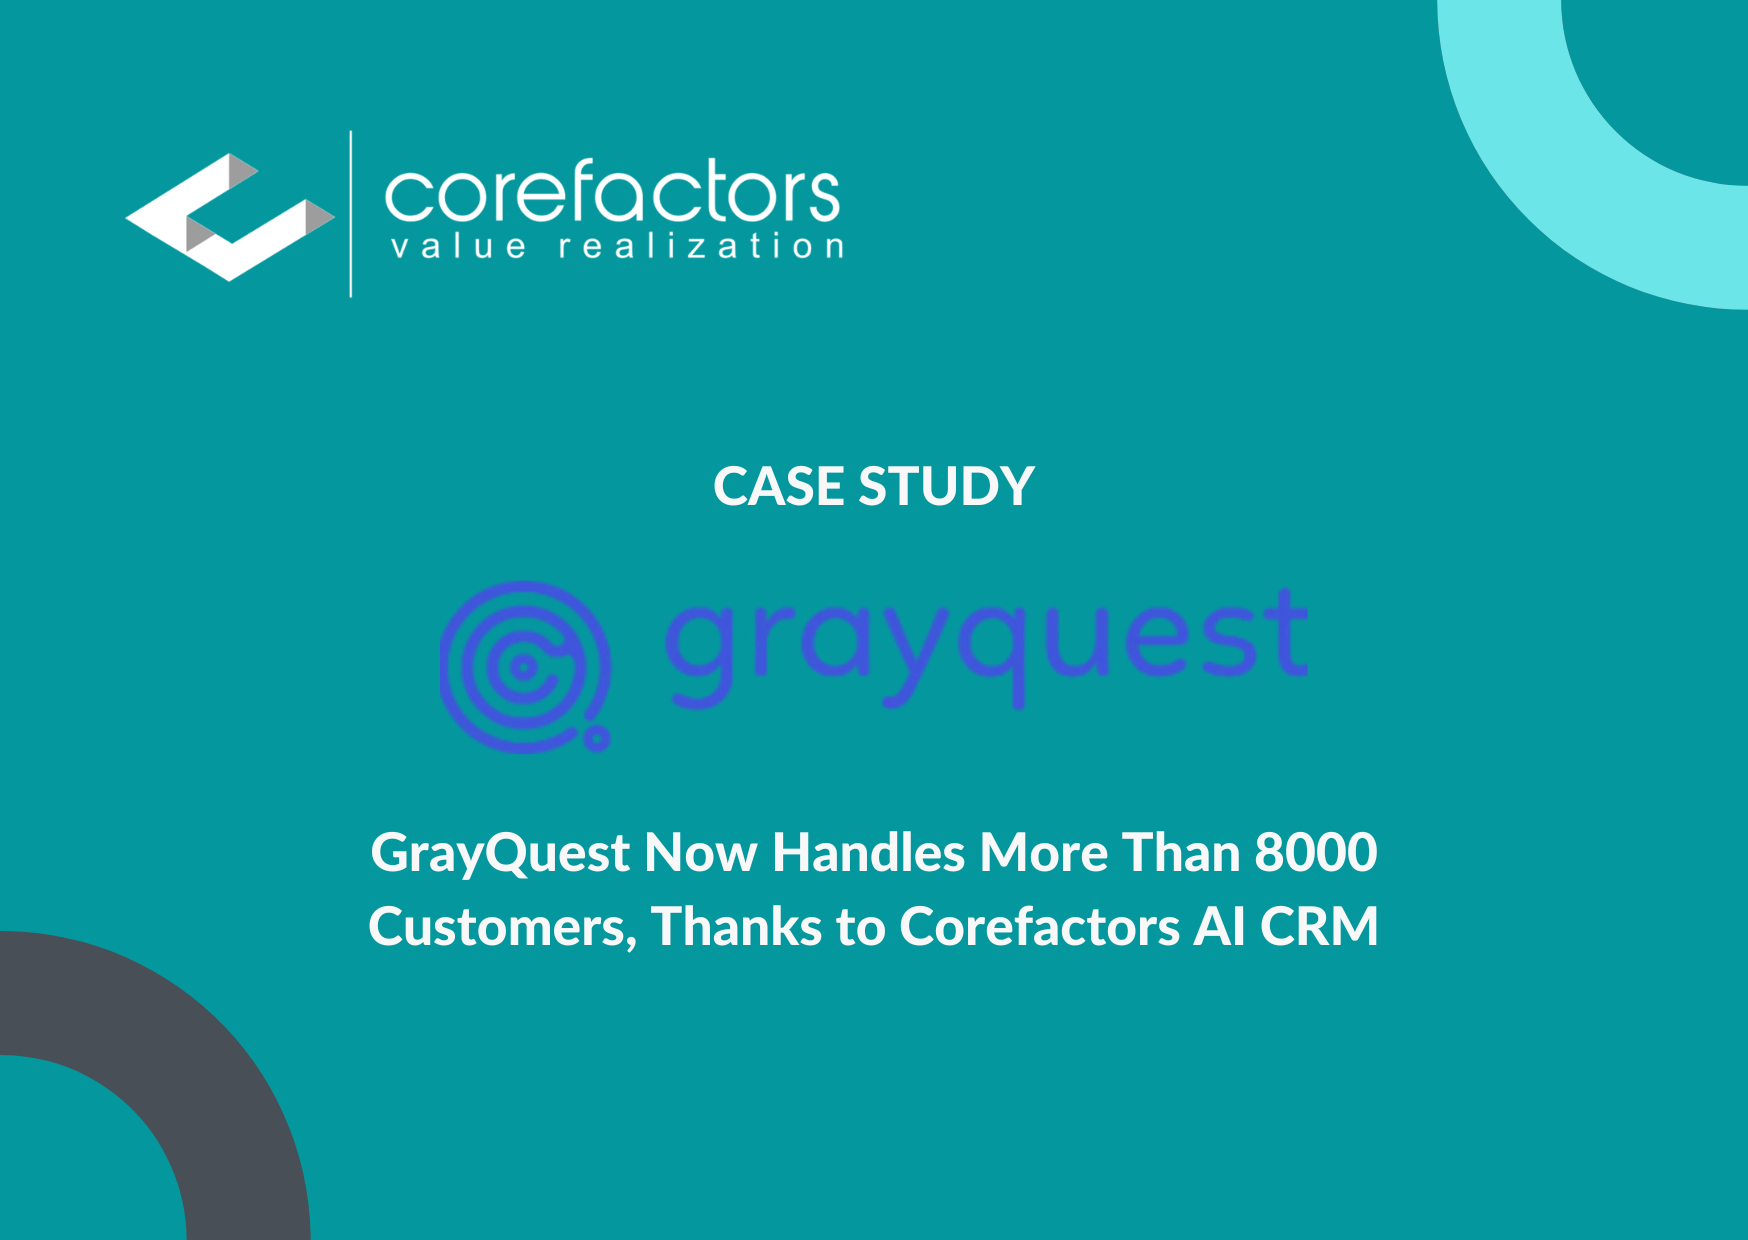 GrayQuest Now Handles More Than 8000 Customers, and they thank Corefactors AI CRM for this